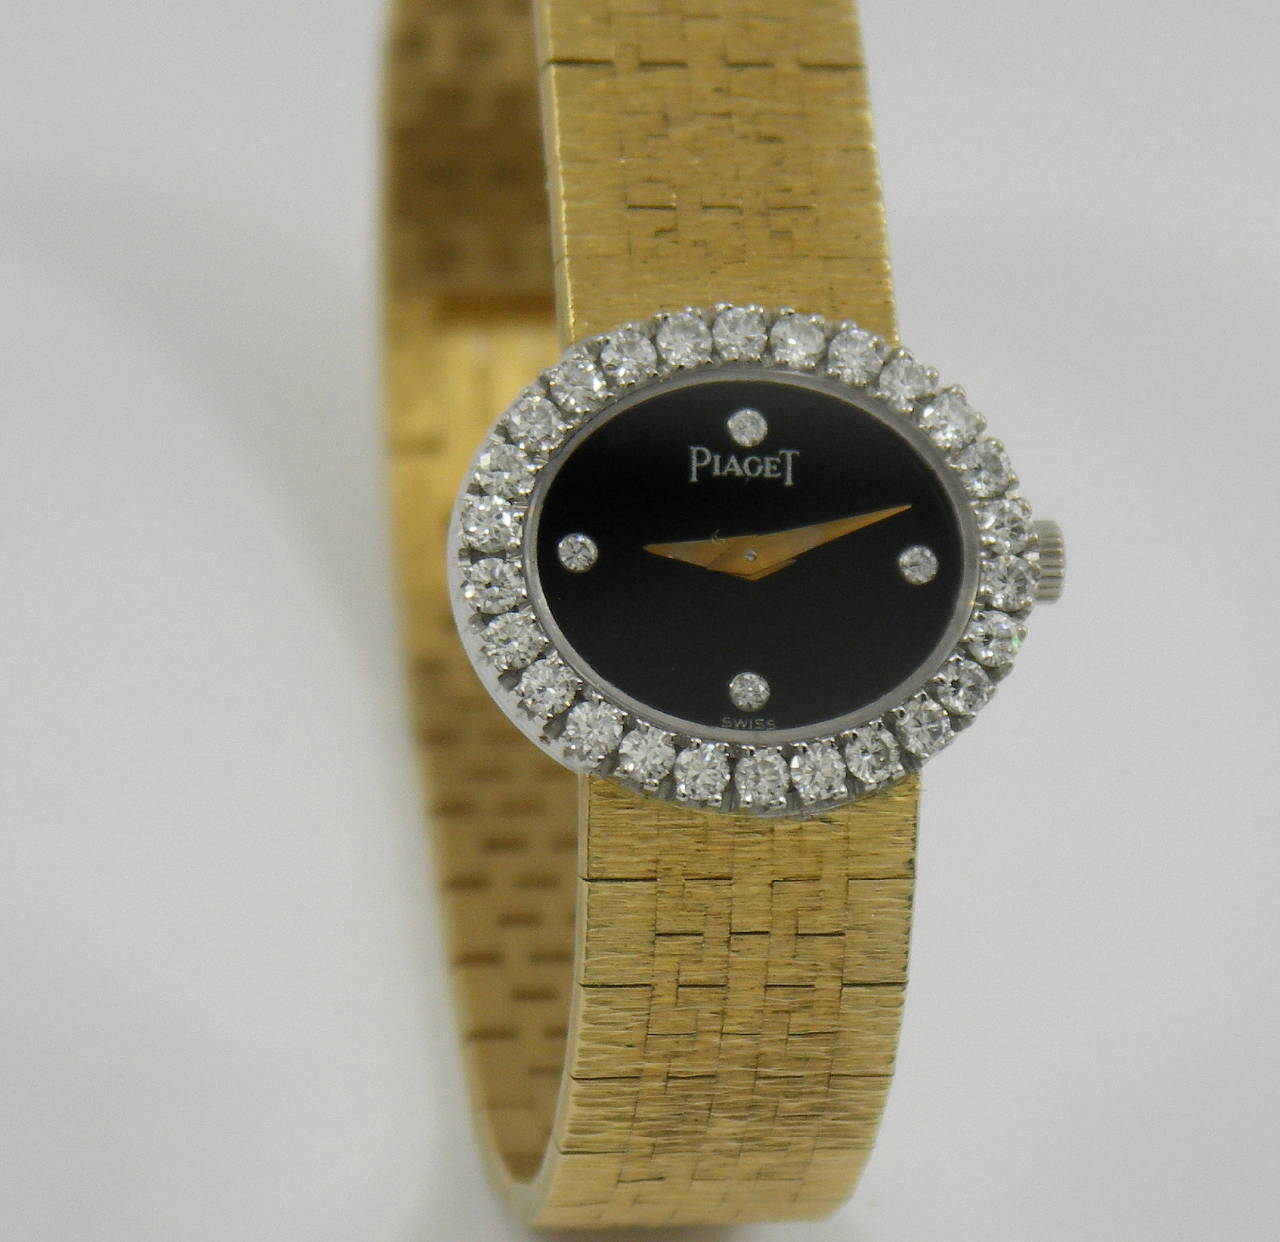 One 18K yellow gold wristwatch by Piaget featuring a bezel measuring 19mm long, and 22mm wide, with an onyx dial set with round brilliant cut diamonds at the 12:00, 3:00, 6:00, and 9:00 positions. Measuring 6 1/4 inches long, this watch features a